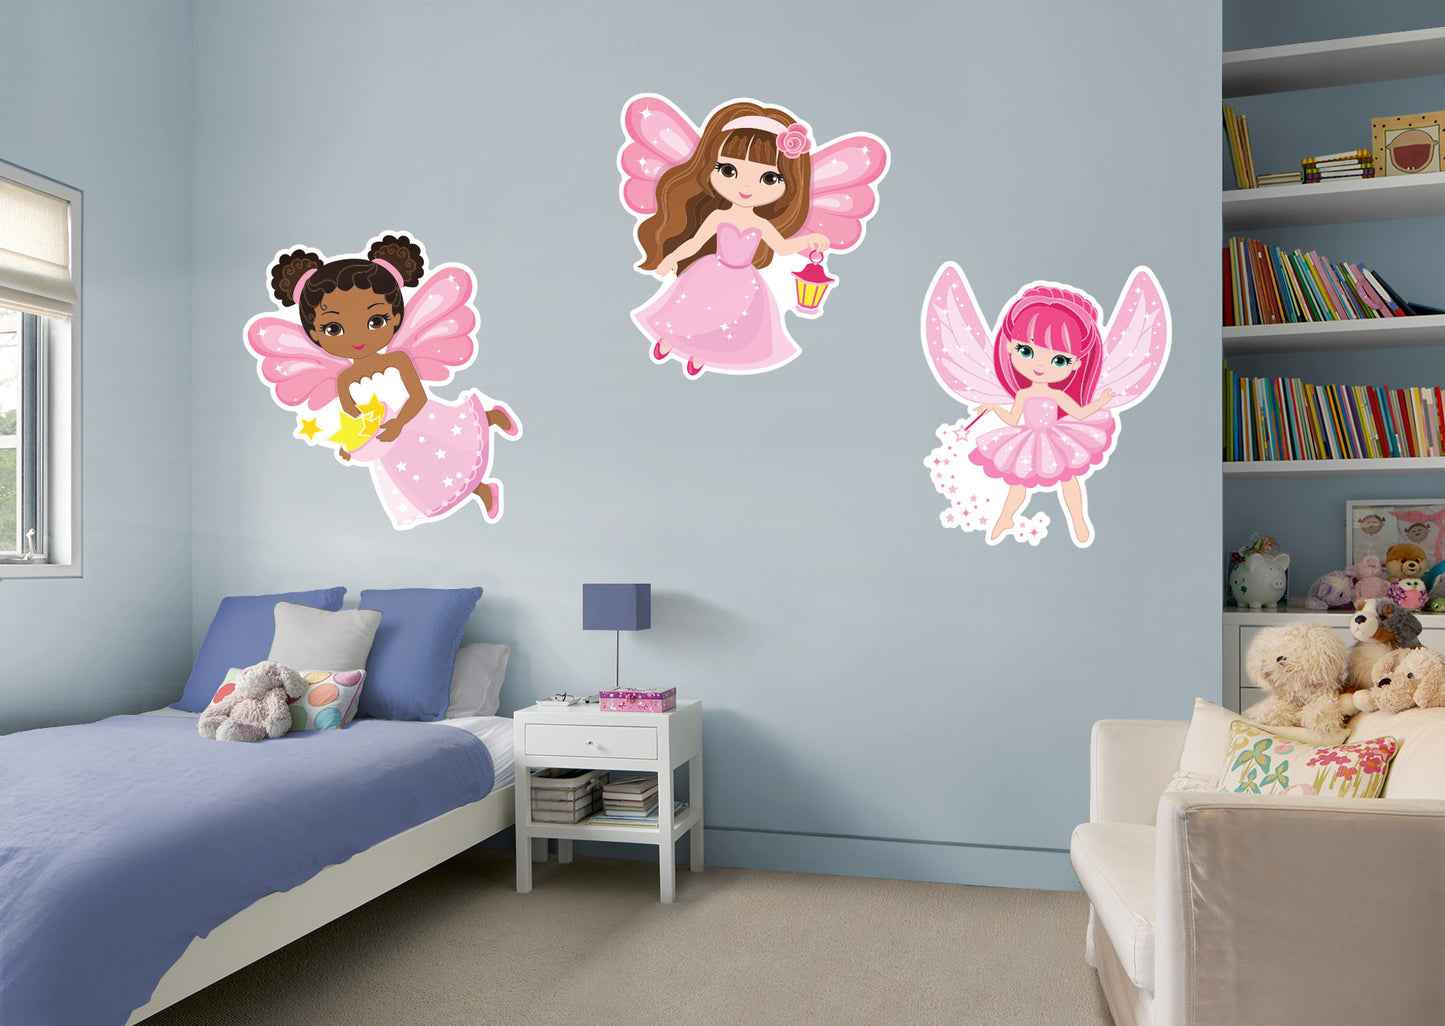 Nursery:  Pink Fairies Collection        -   Removable Wall   Adhesive Decal